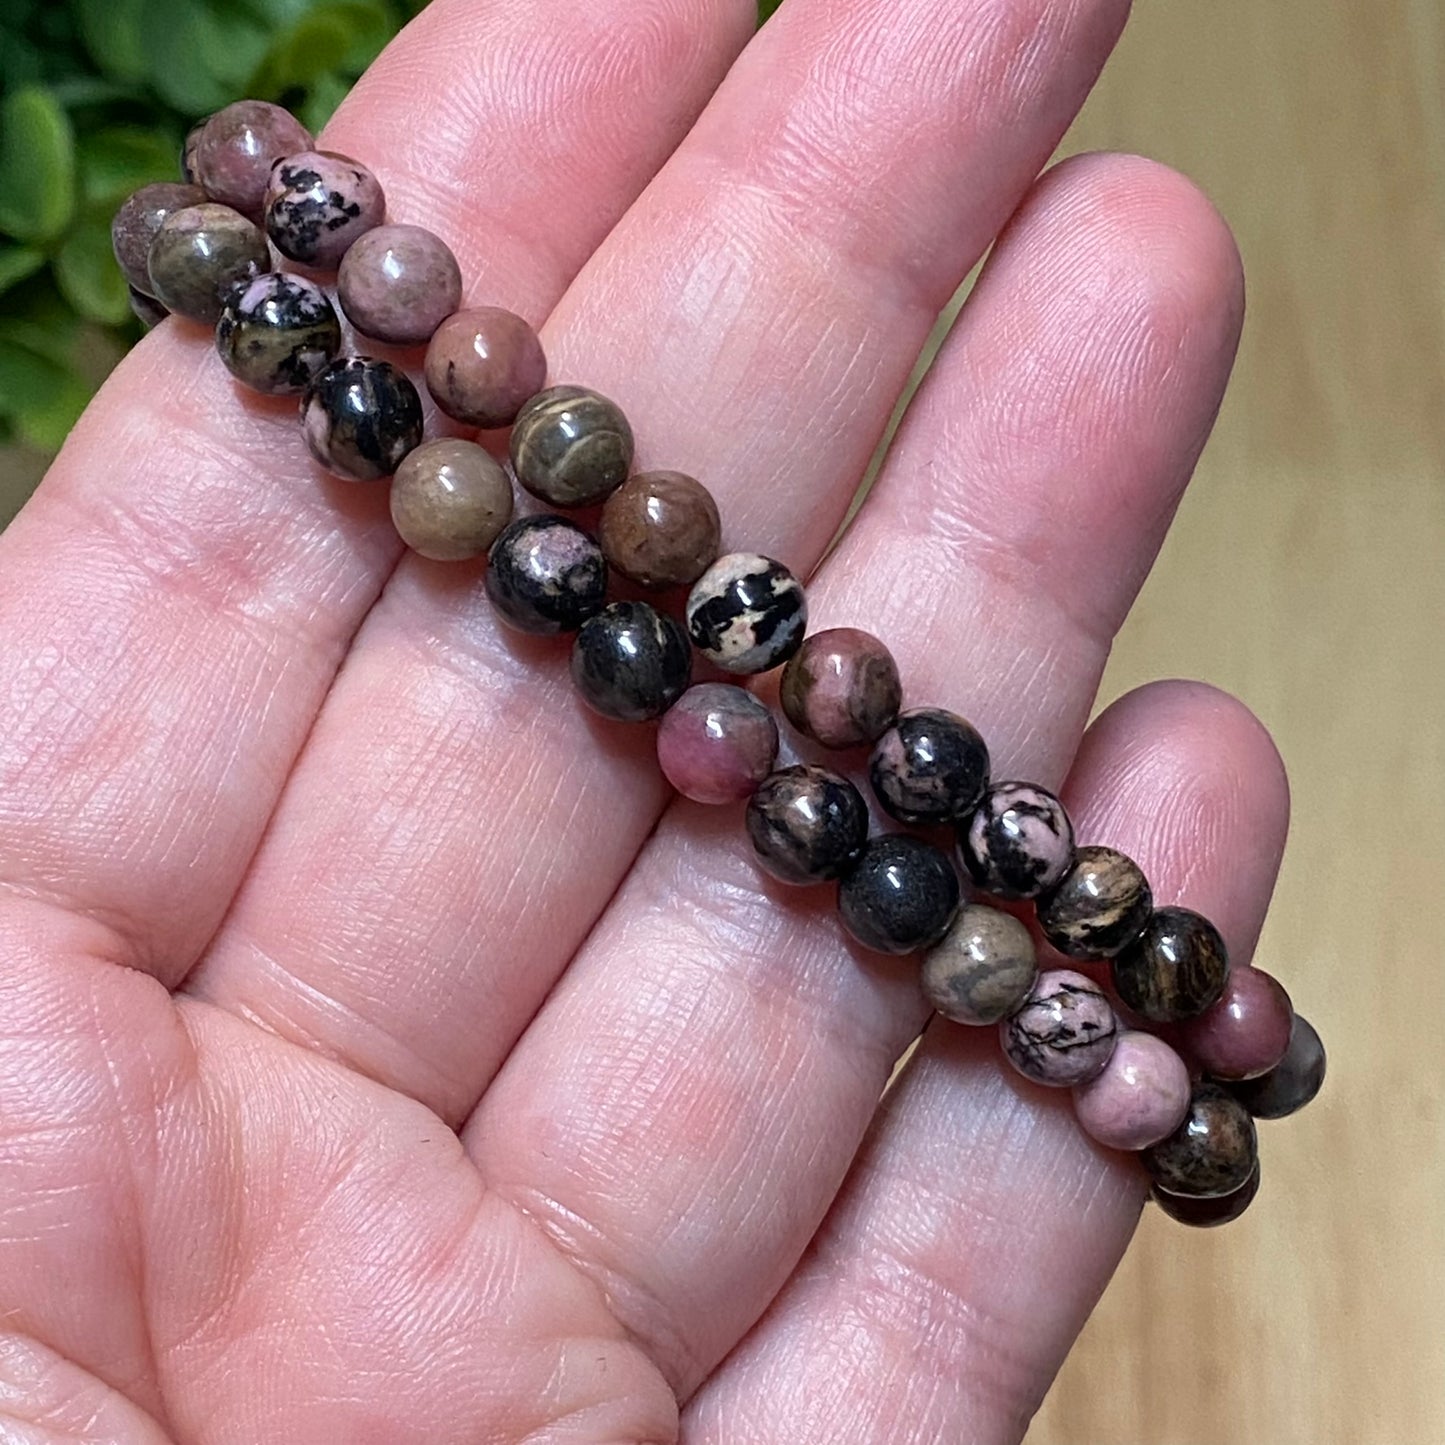 Rhodonite 6mm Bead Bracelet - Self-Love, Compassion and Confidence